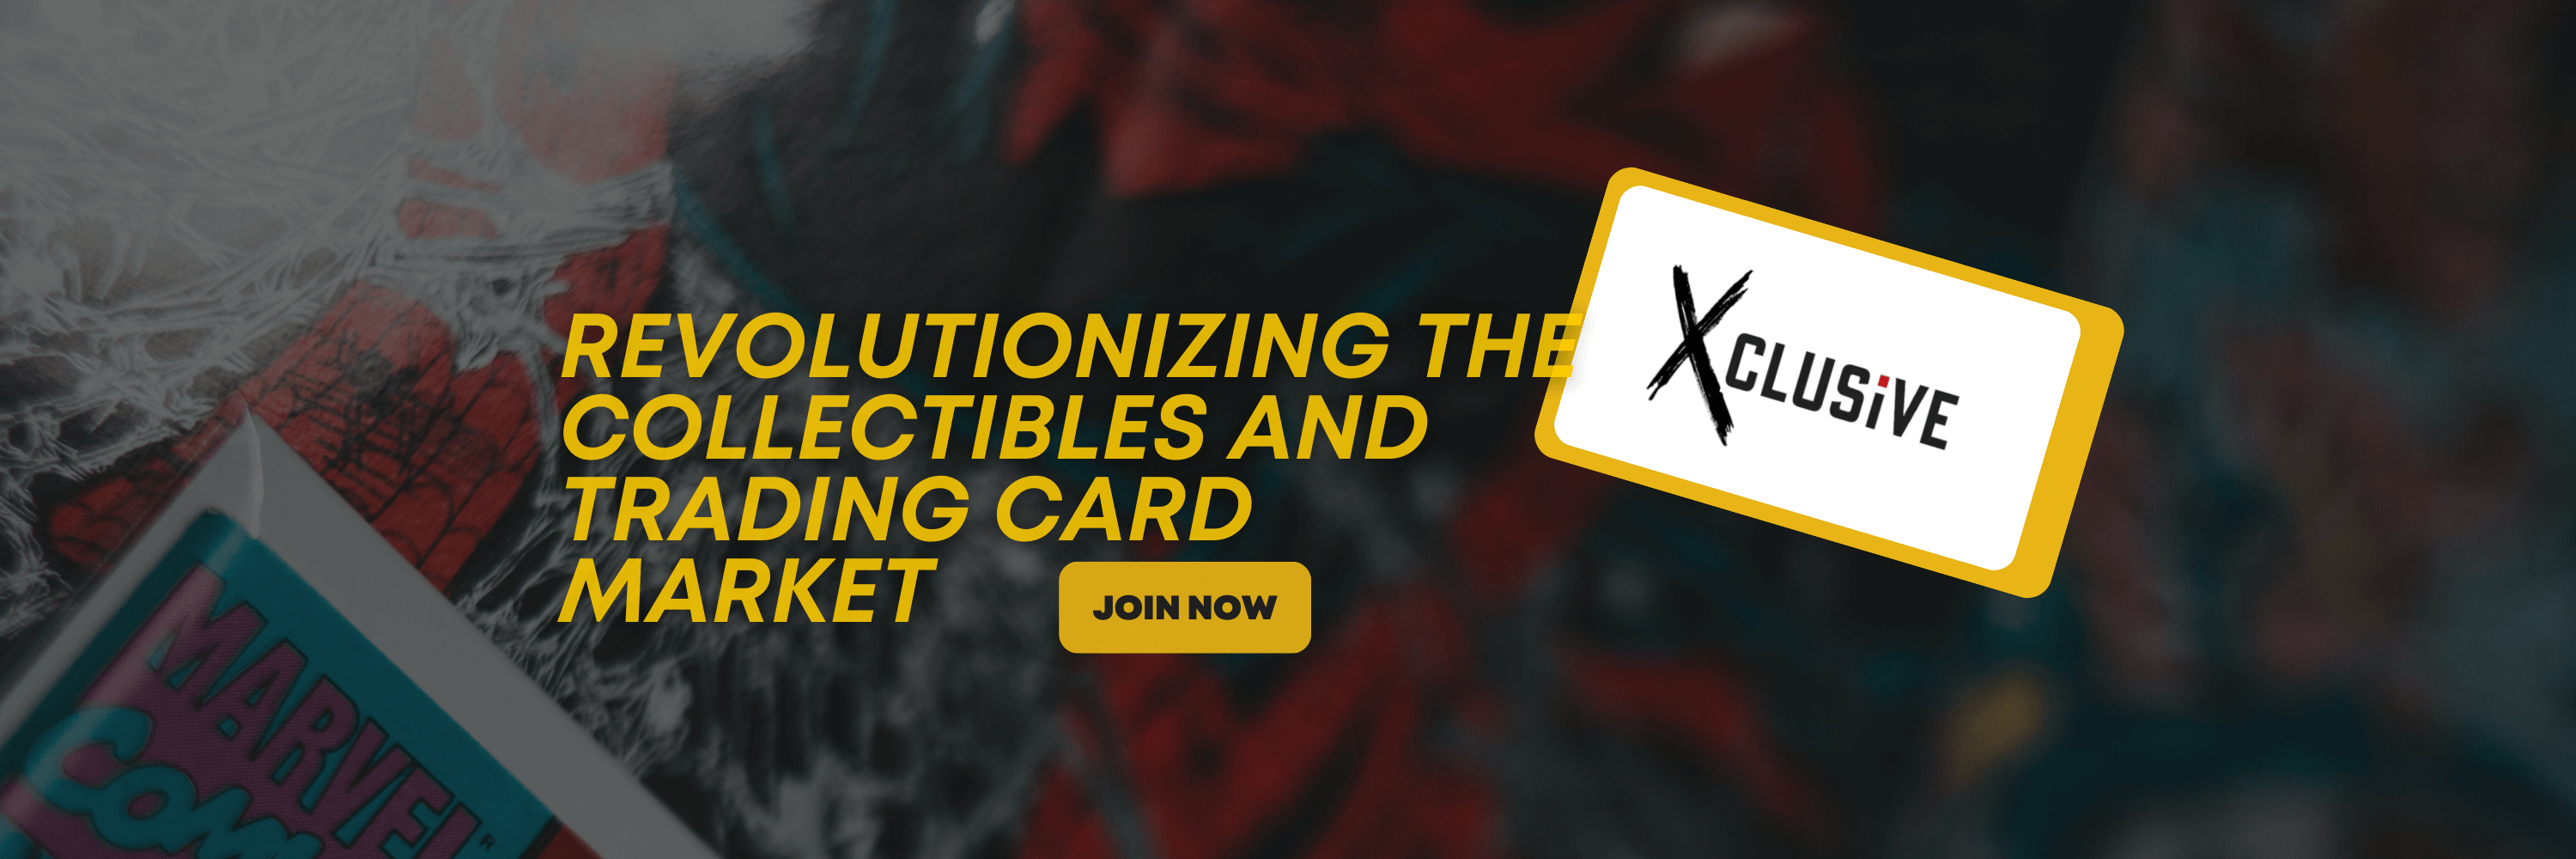 Revolutionizing the Collectibles Market with Xclusive Collectibles